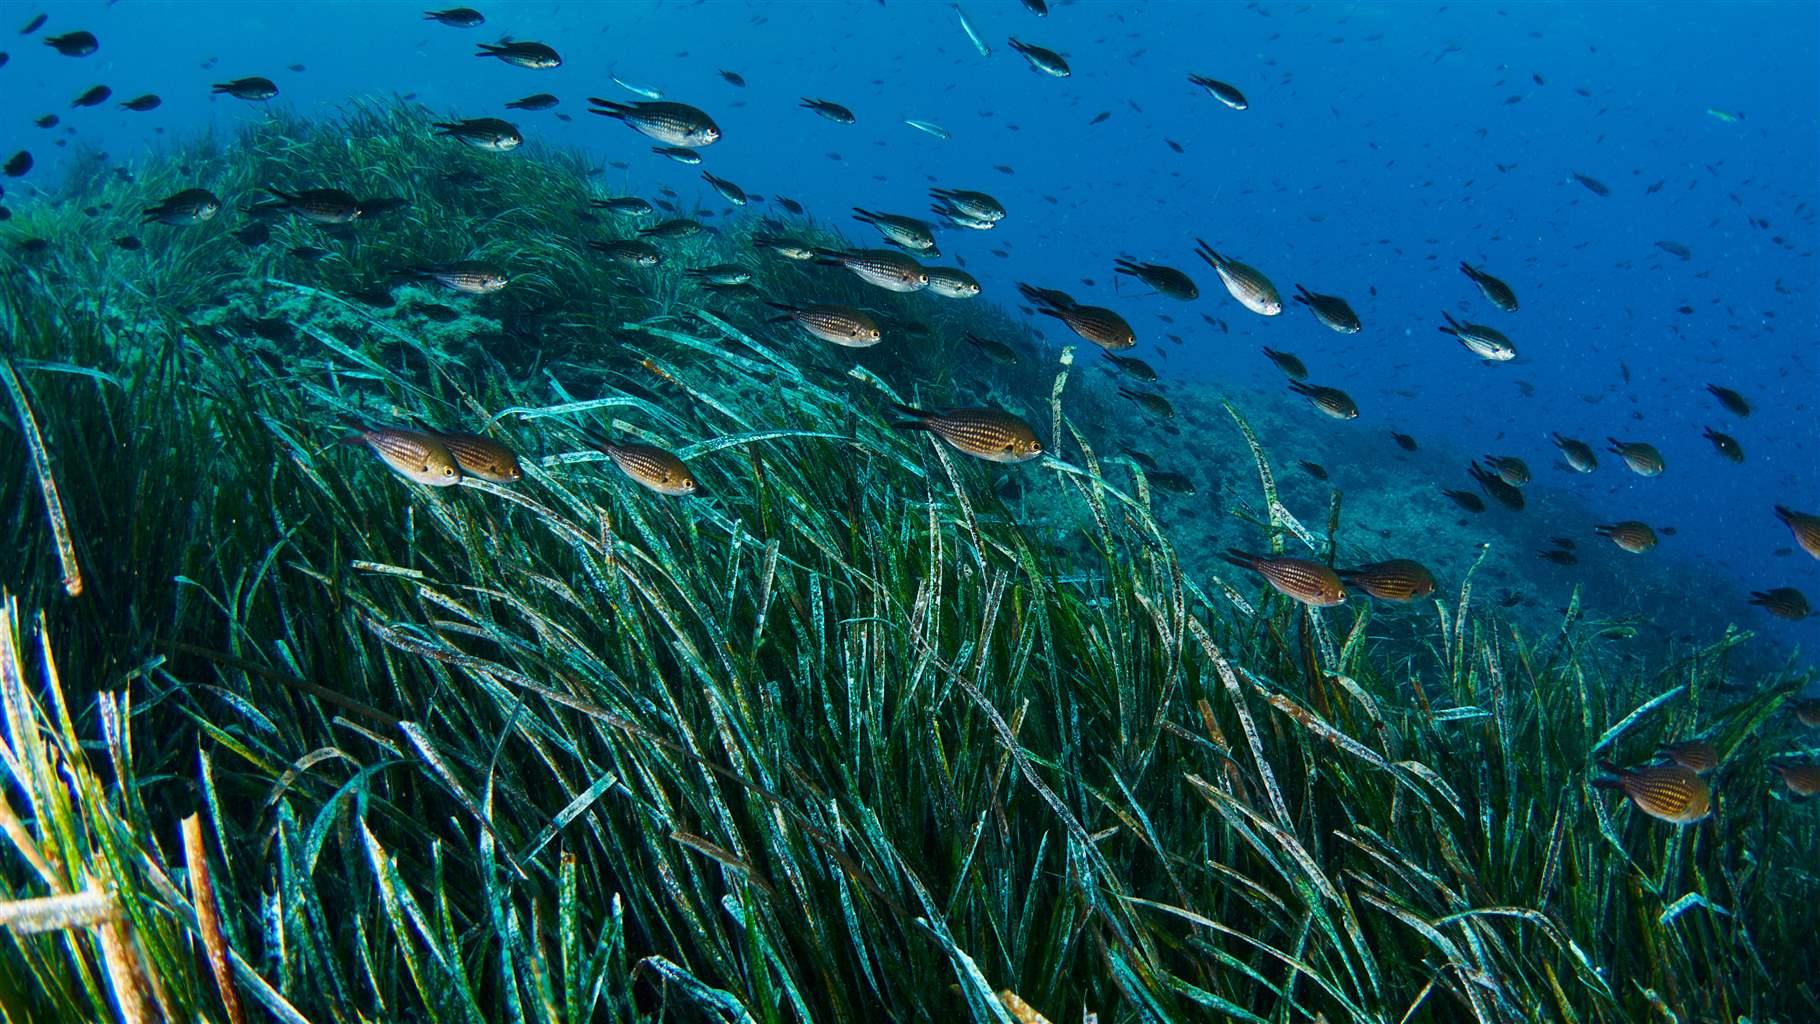 Green seagrass moves with the current in the blue sea, with dozens of small striped and spotted fish swimming above.